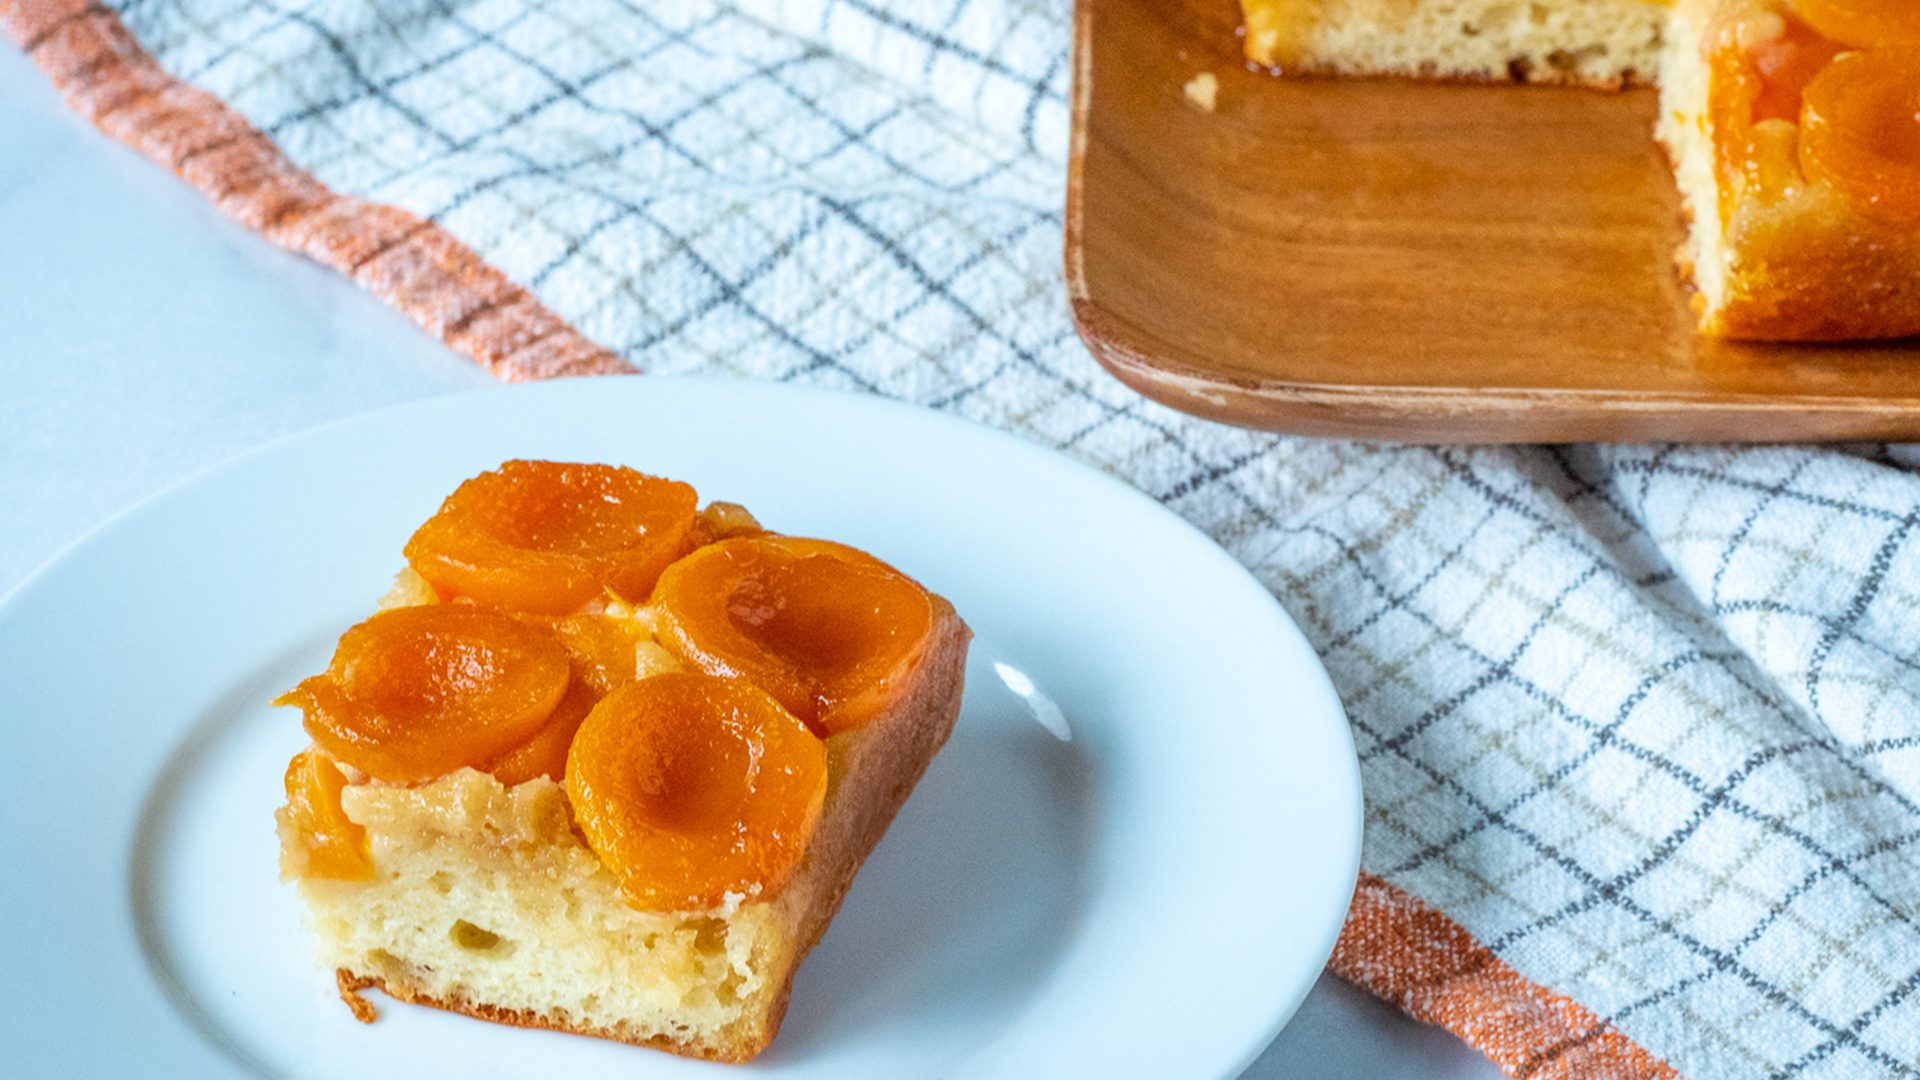 Apricot Clafoutis - Del's cooking twist